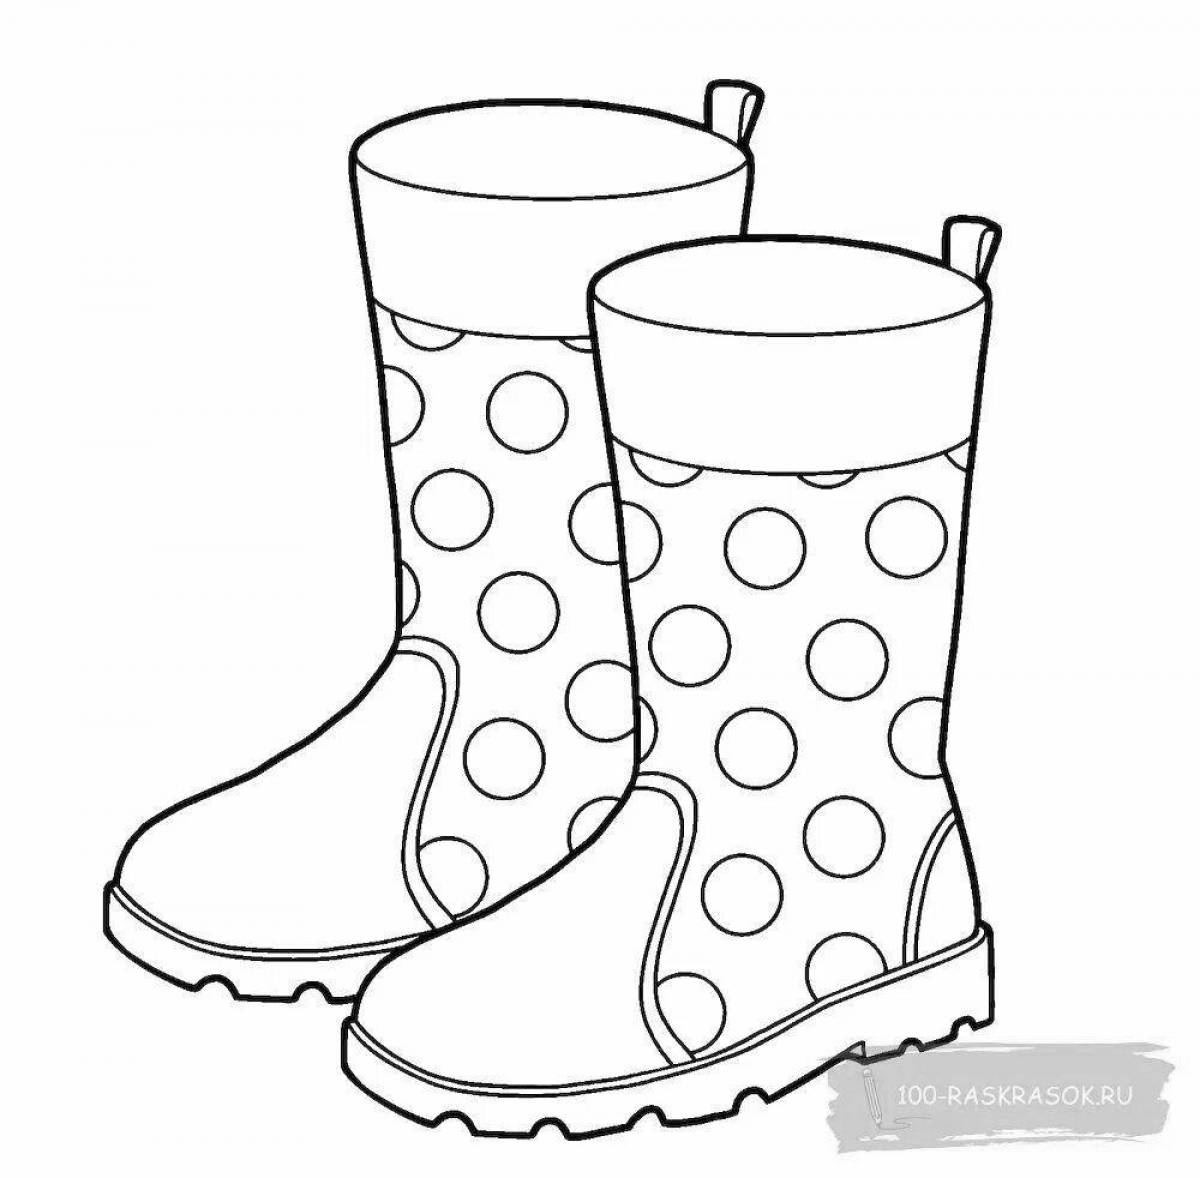 Coloring page cool rubber boots